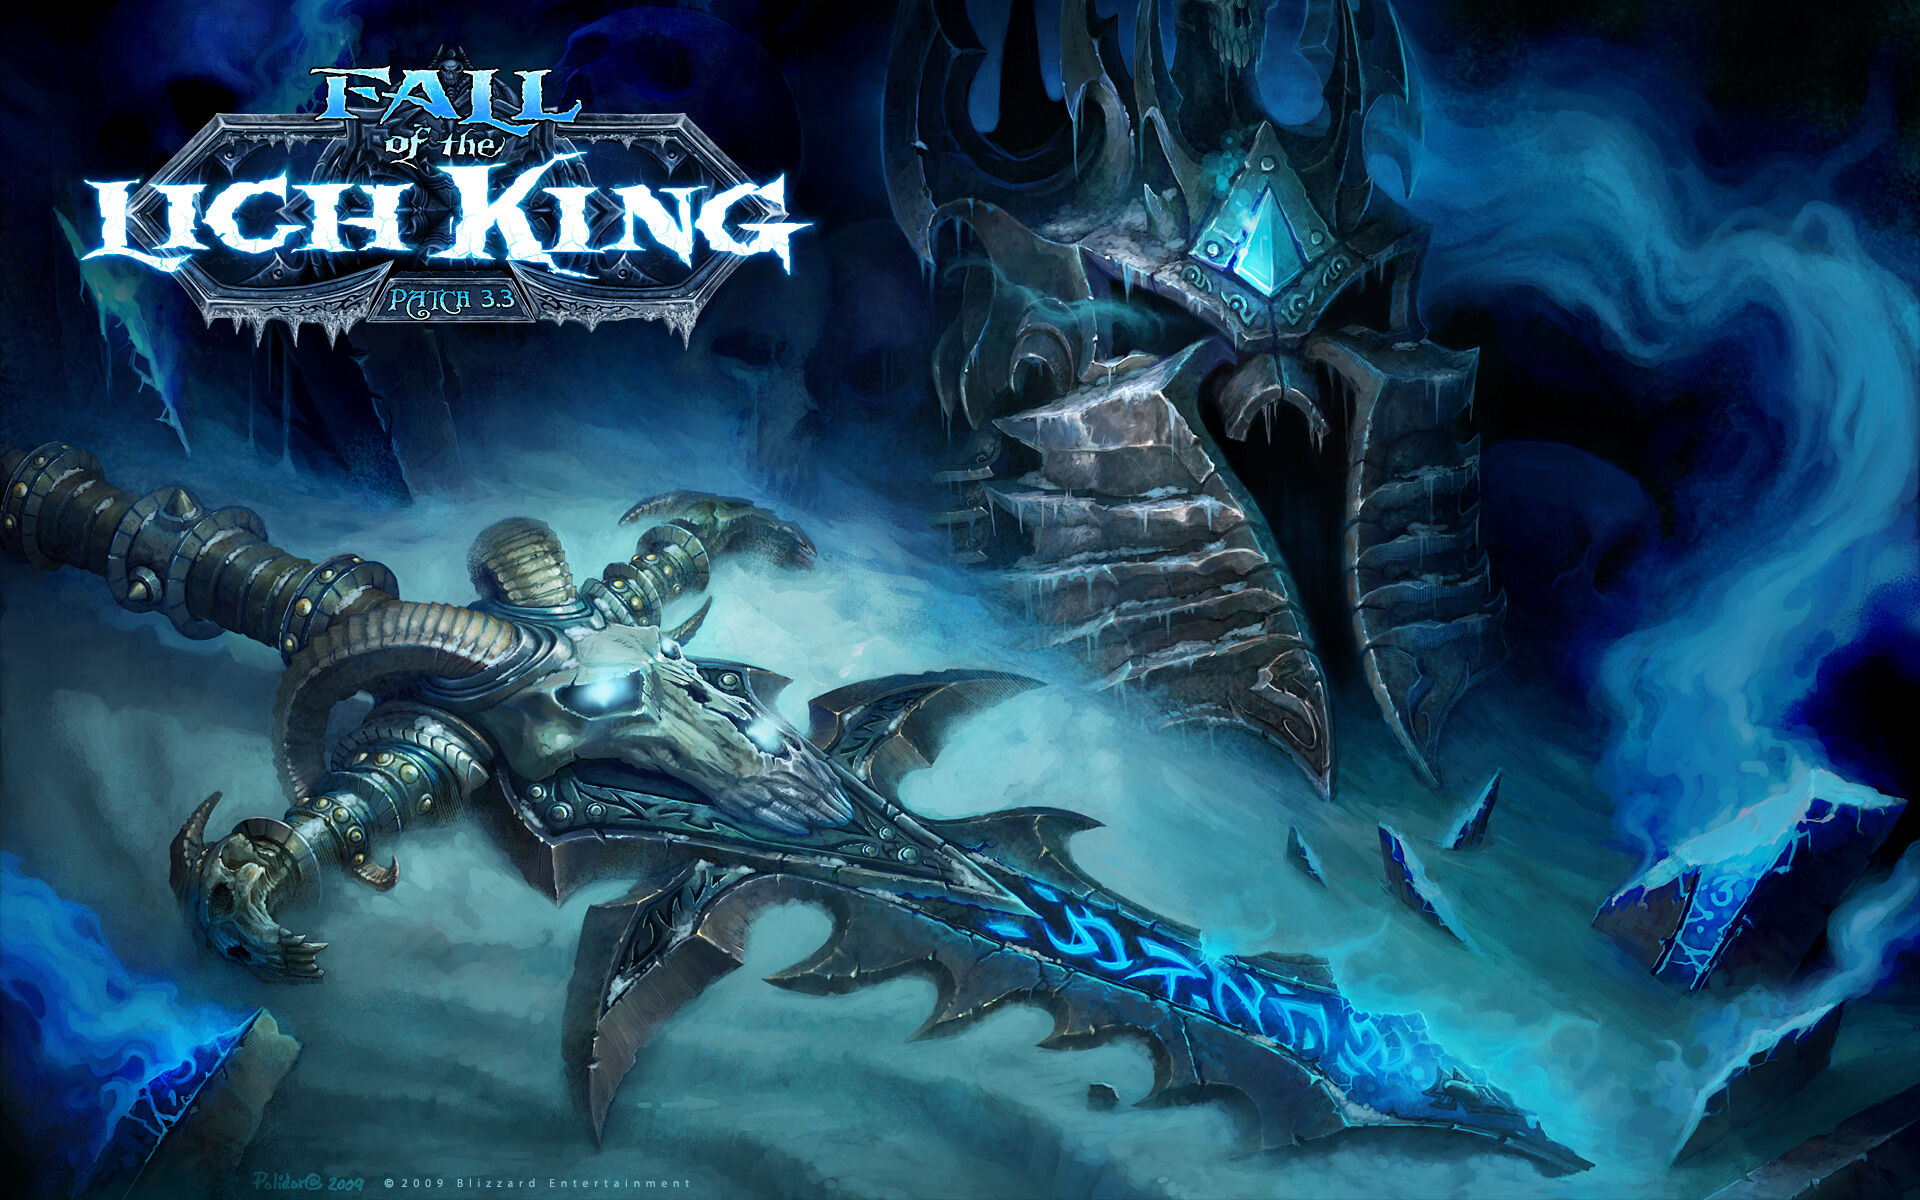 https://static.wikia.nocookie.net/wowpedia/images/b/b3/Fall_of_the_Lich_King_wallpaper.jpg/revision/latest/scale-to-width-down/1920?cb=20180602234435